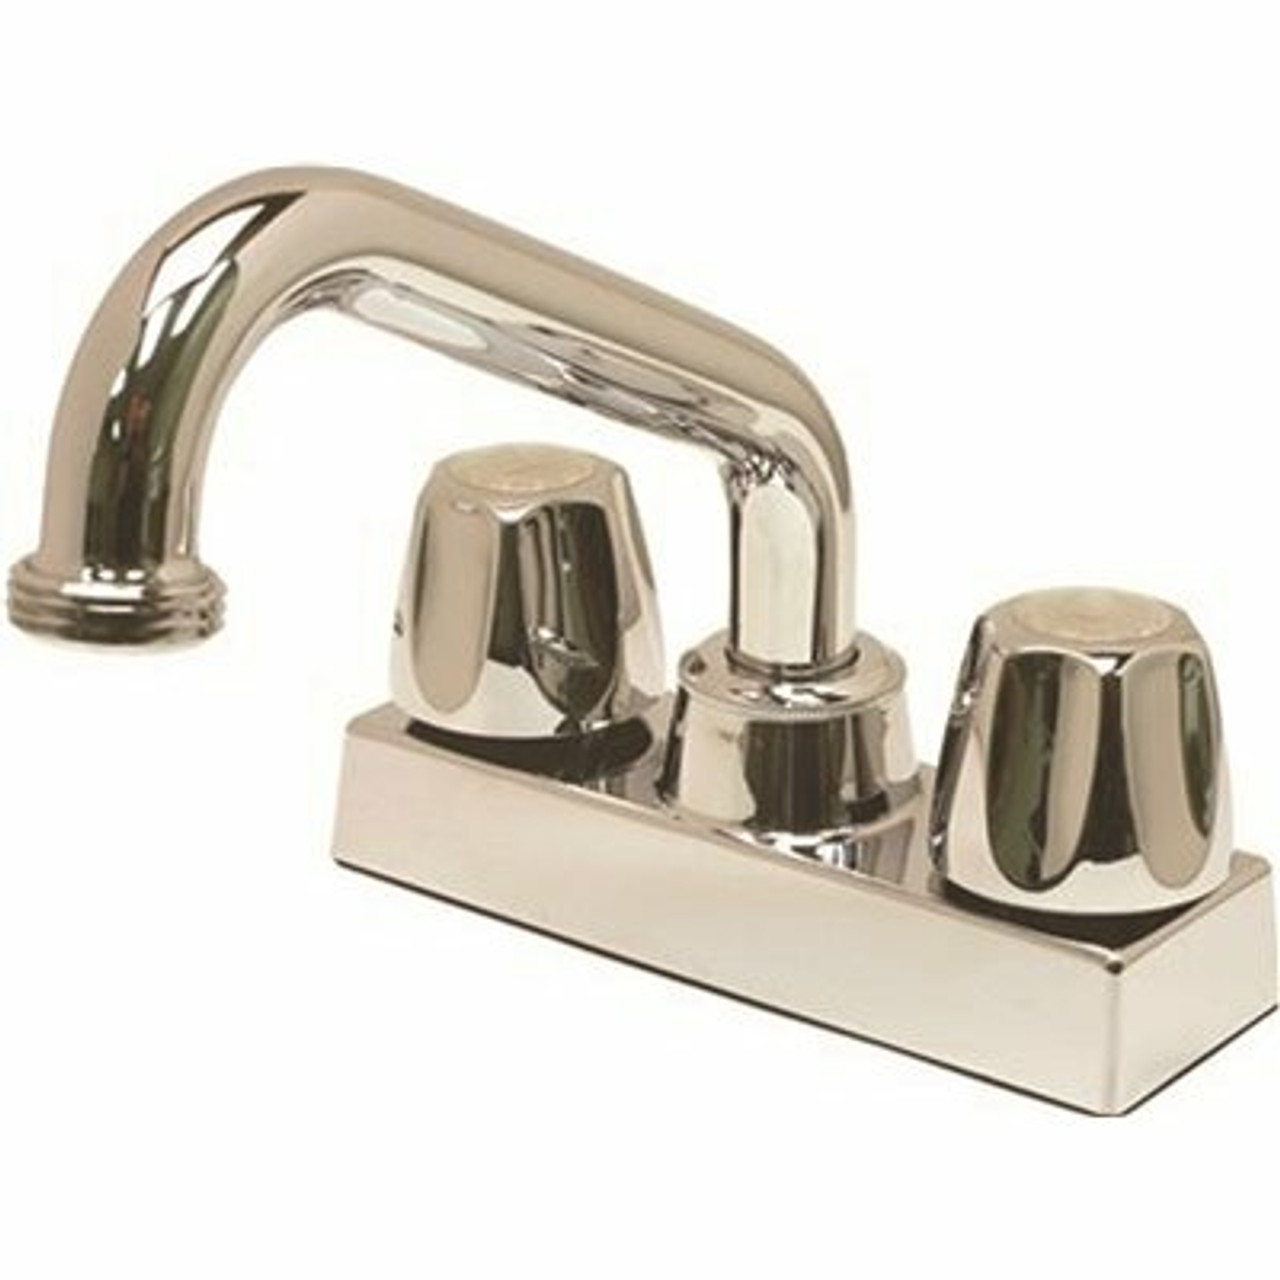 Proplus 2-Handle Utility Faucet In Chrome - 160005